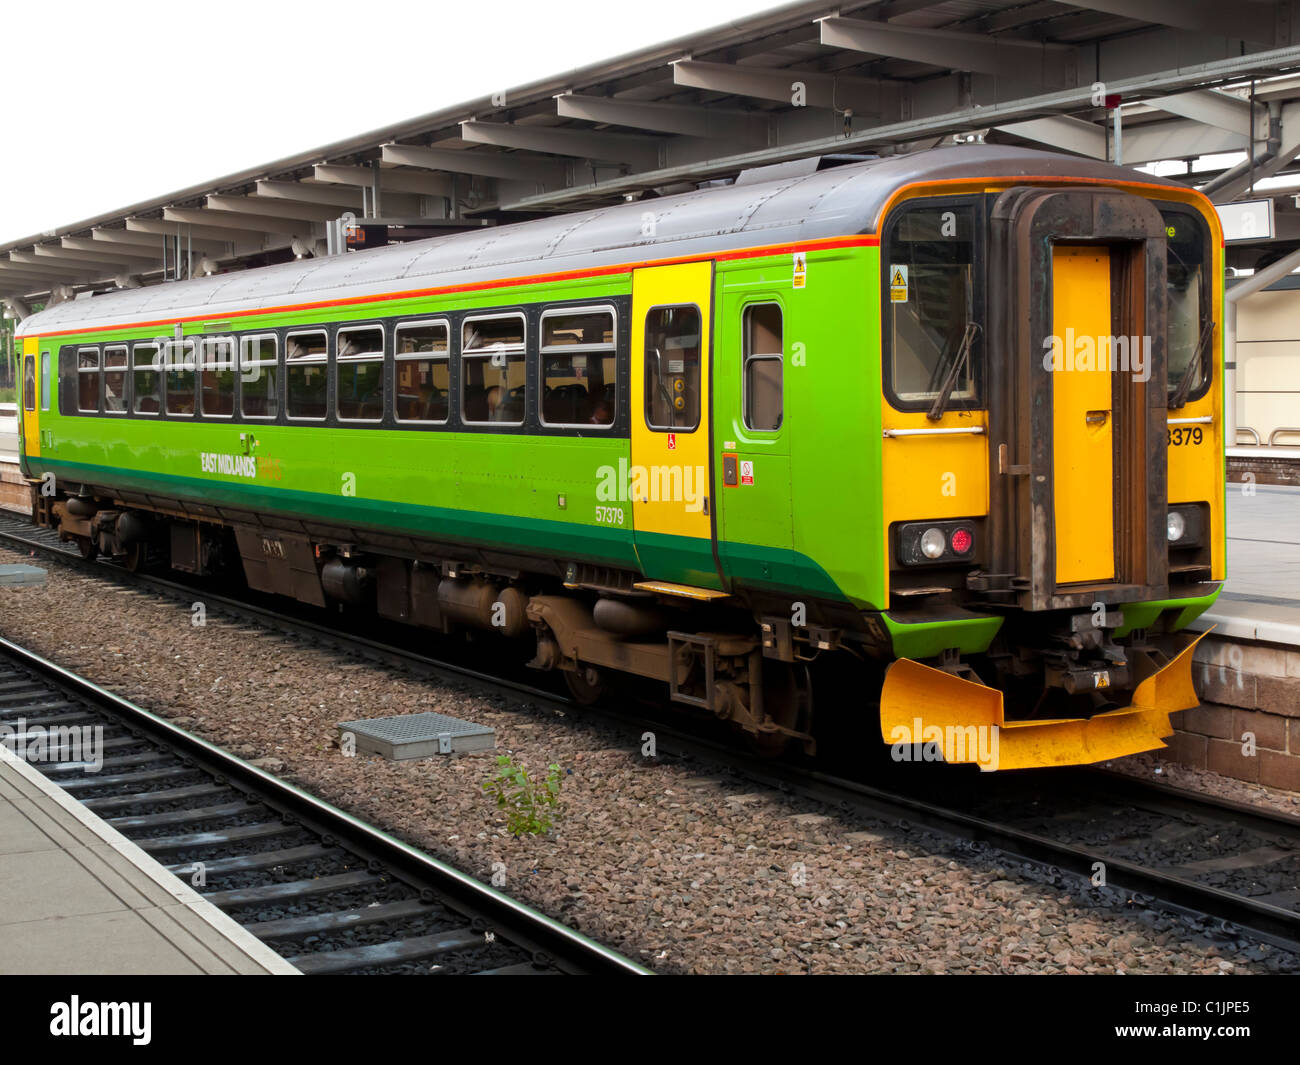 Single unit diesel commuter train used on the railway line between Nottingham and Matlock operated by East Midands Trains UK Stock Photo